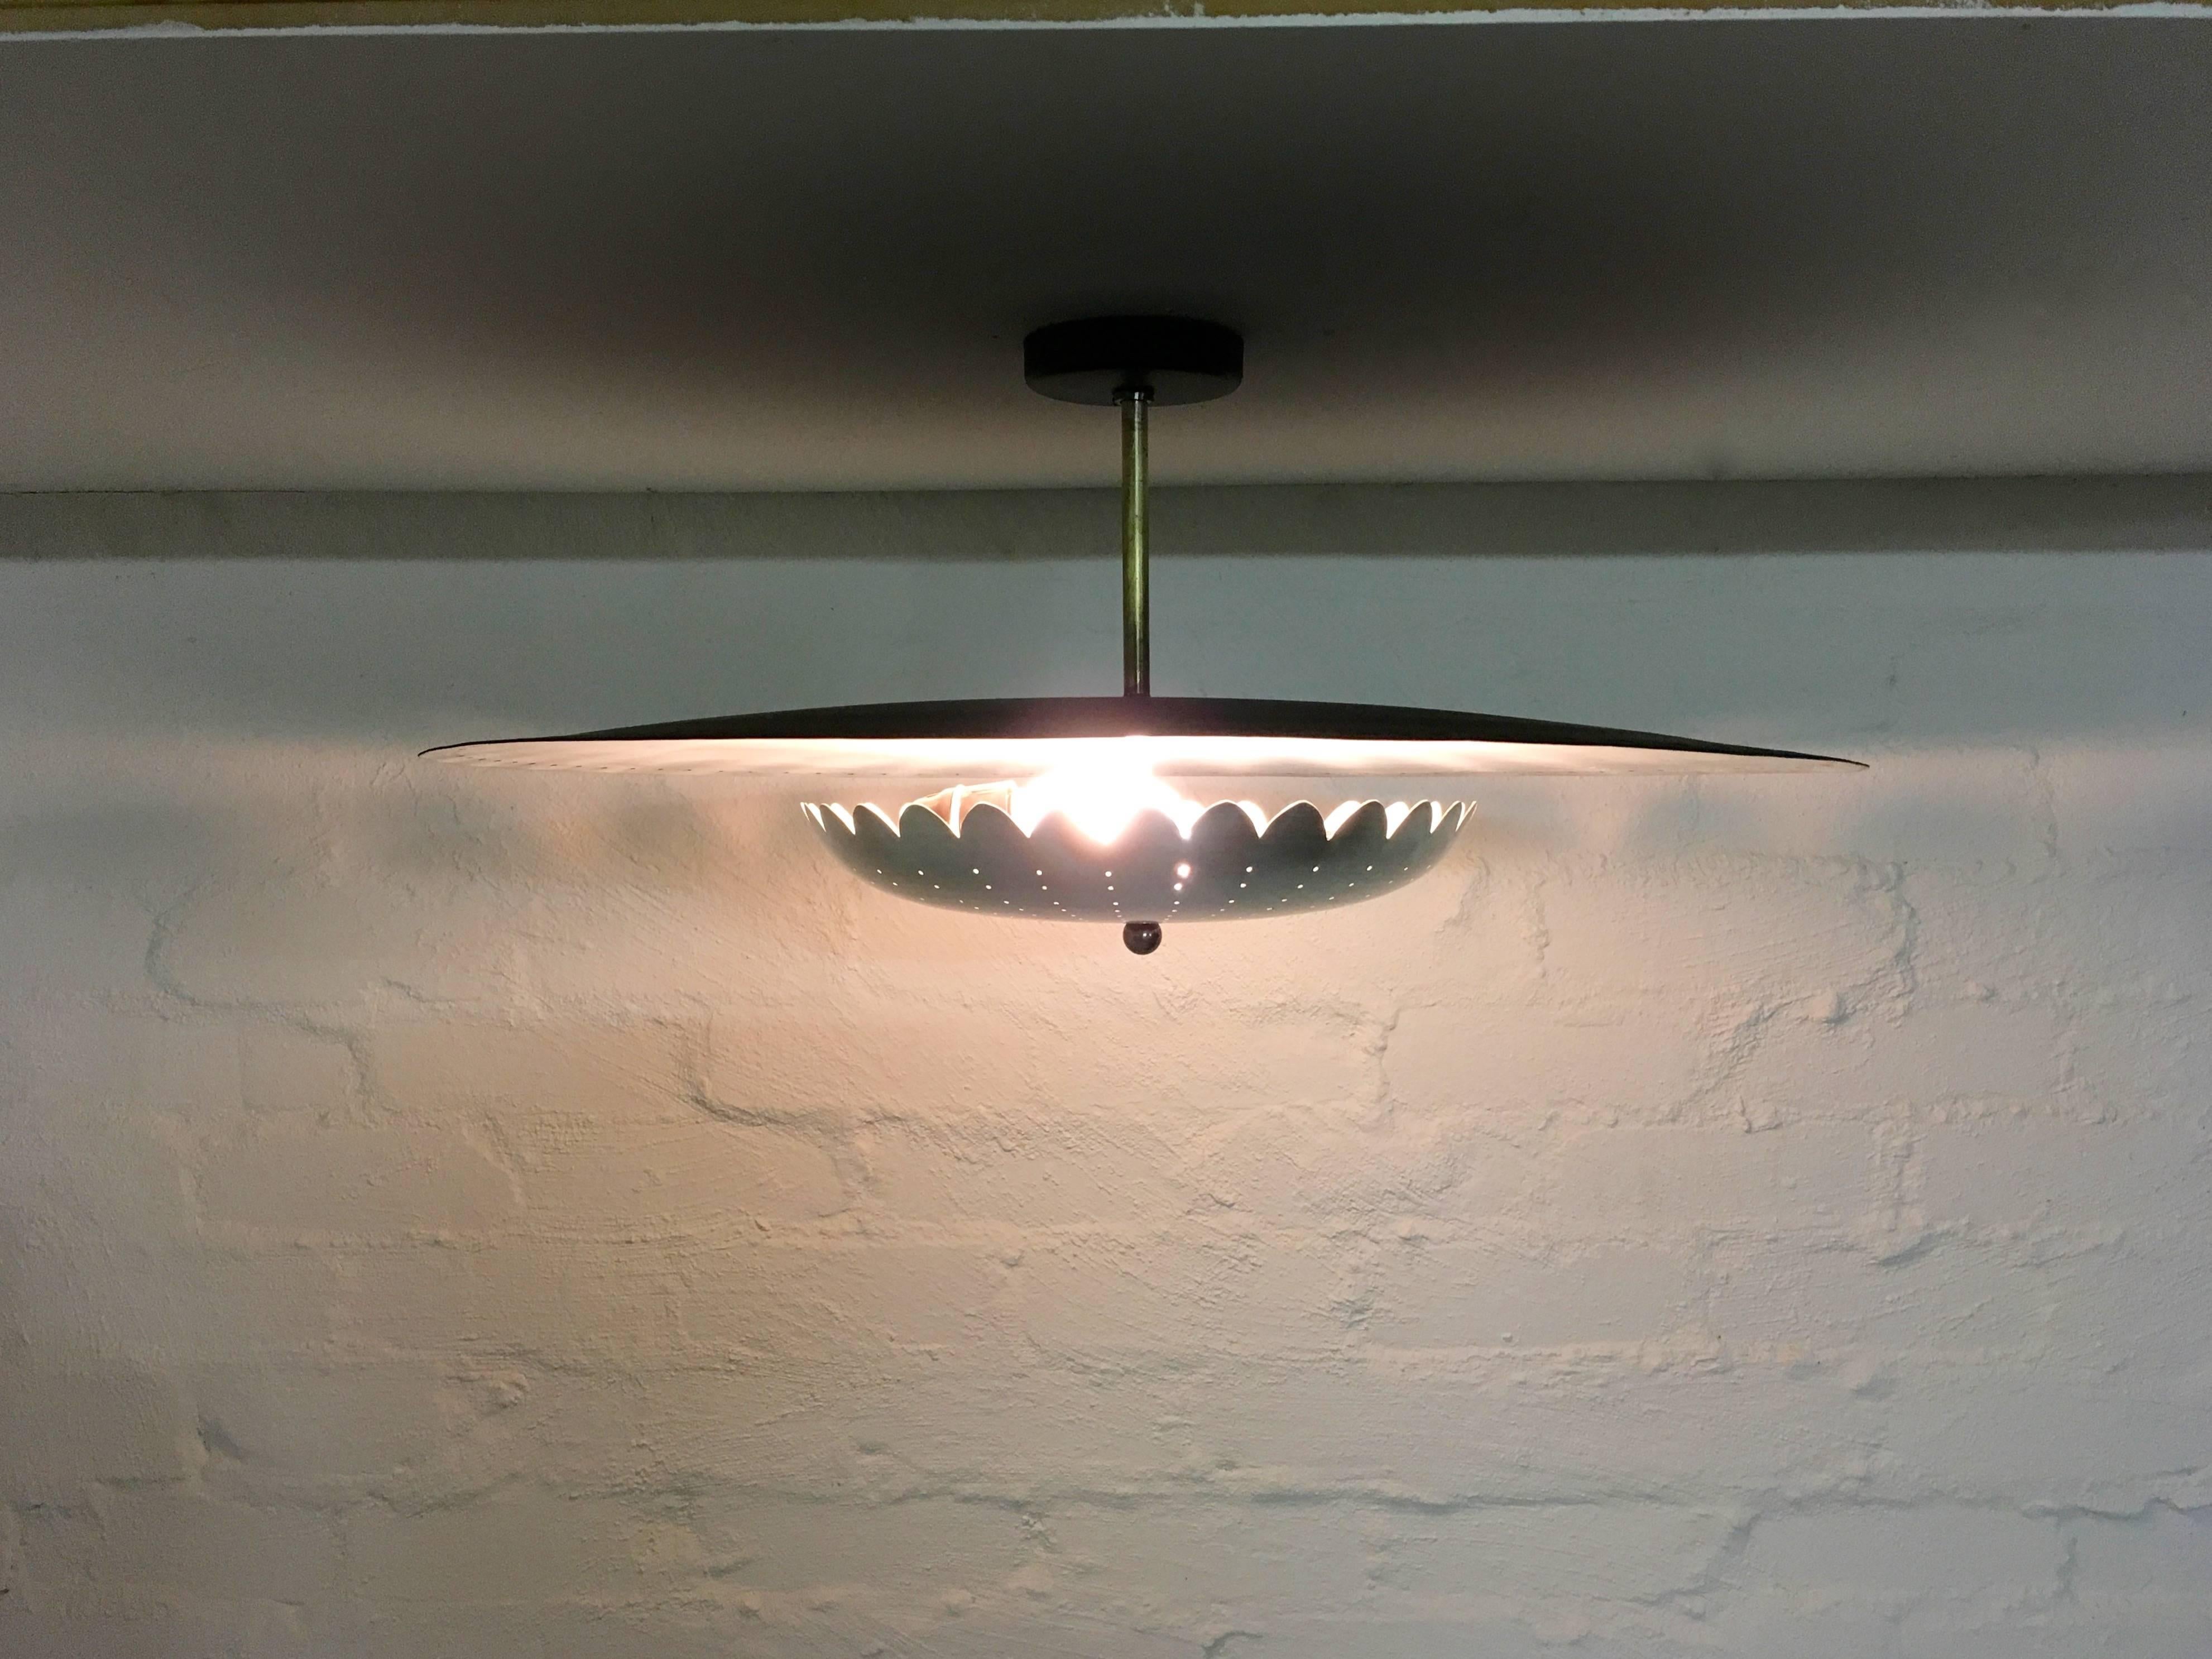 This feather-light ceiling fixture or reflector is a sweet Mid-Century number with some lovely period details - brass fittings, scalloped edges and a grand scale and proportion. It provides both ambient light from the large upper reflector and